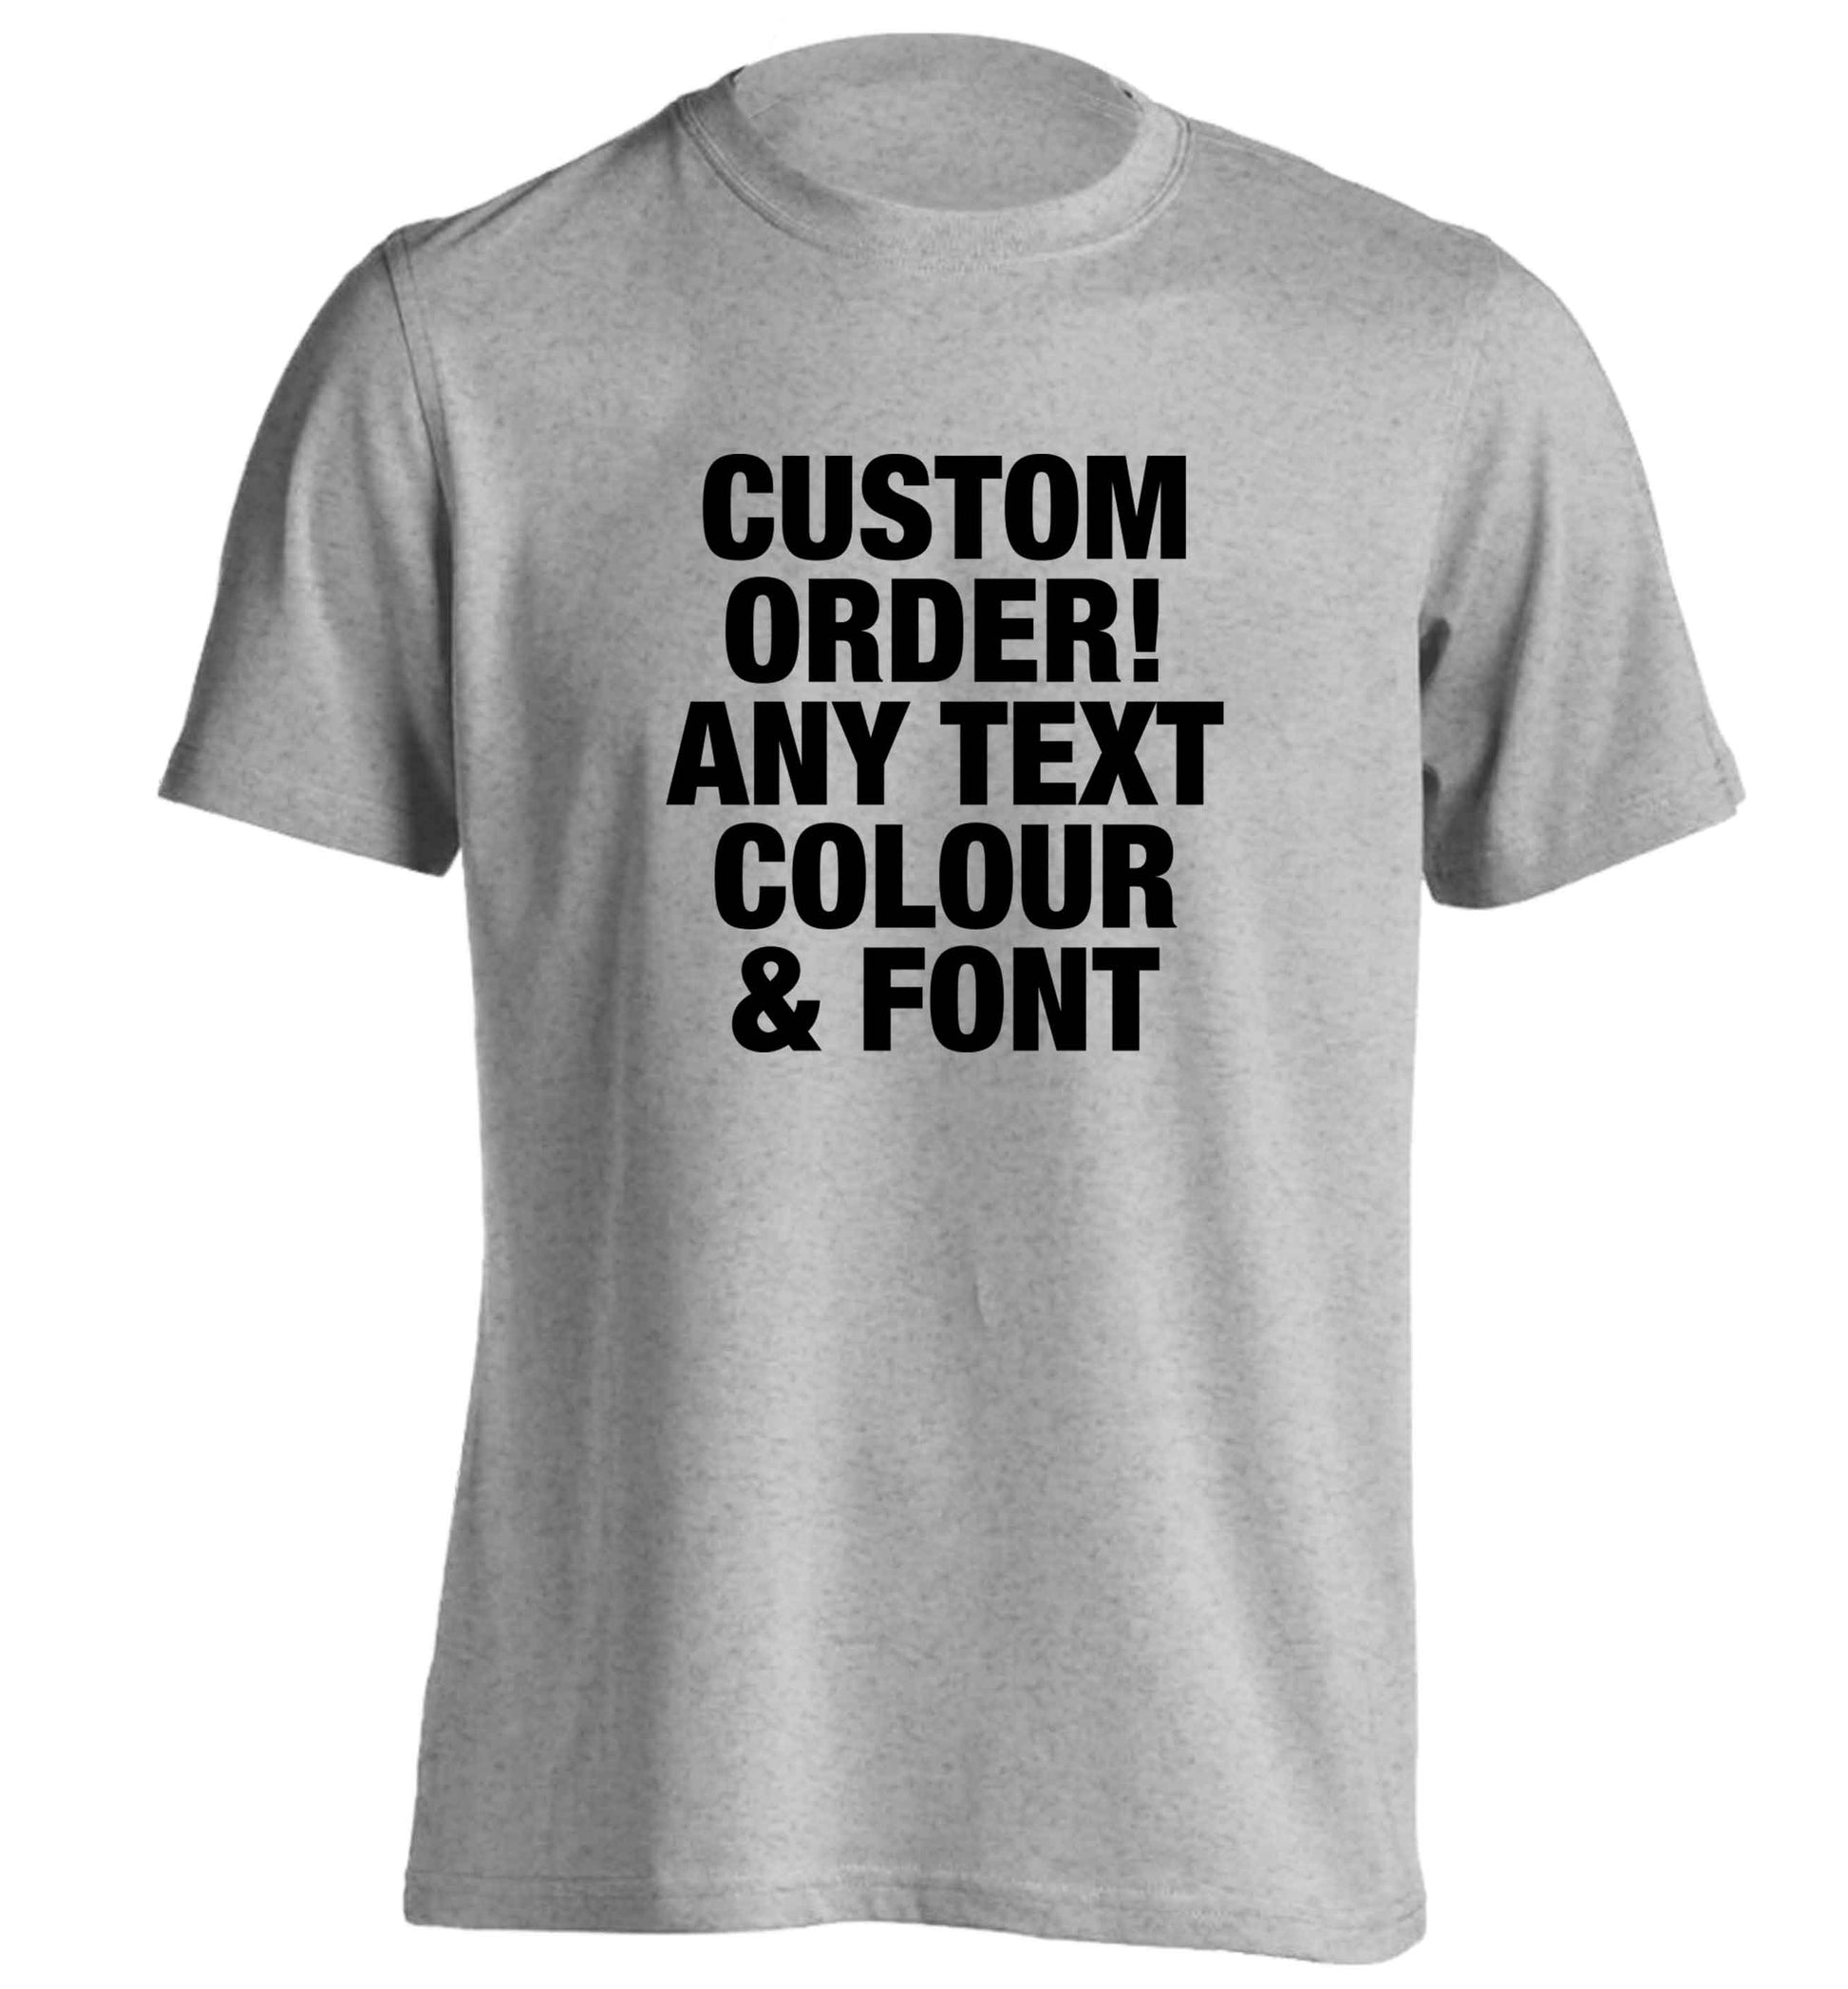 Custom order any text colour and font adults unisex grey Tshirt 2XL